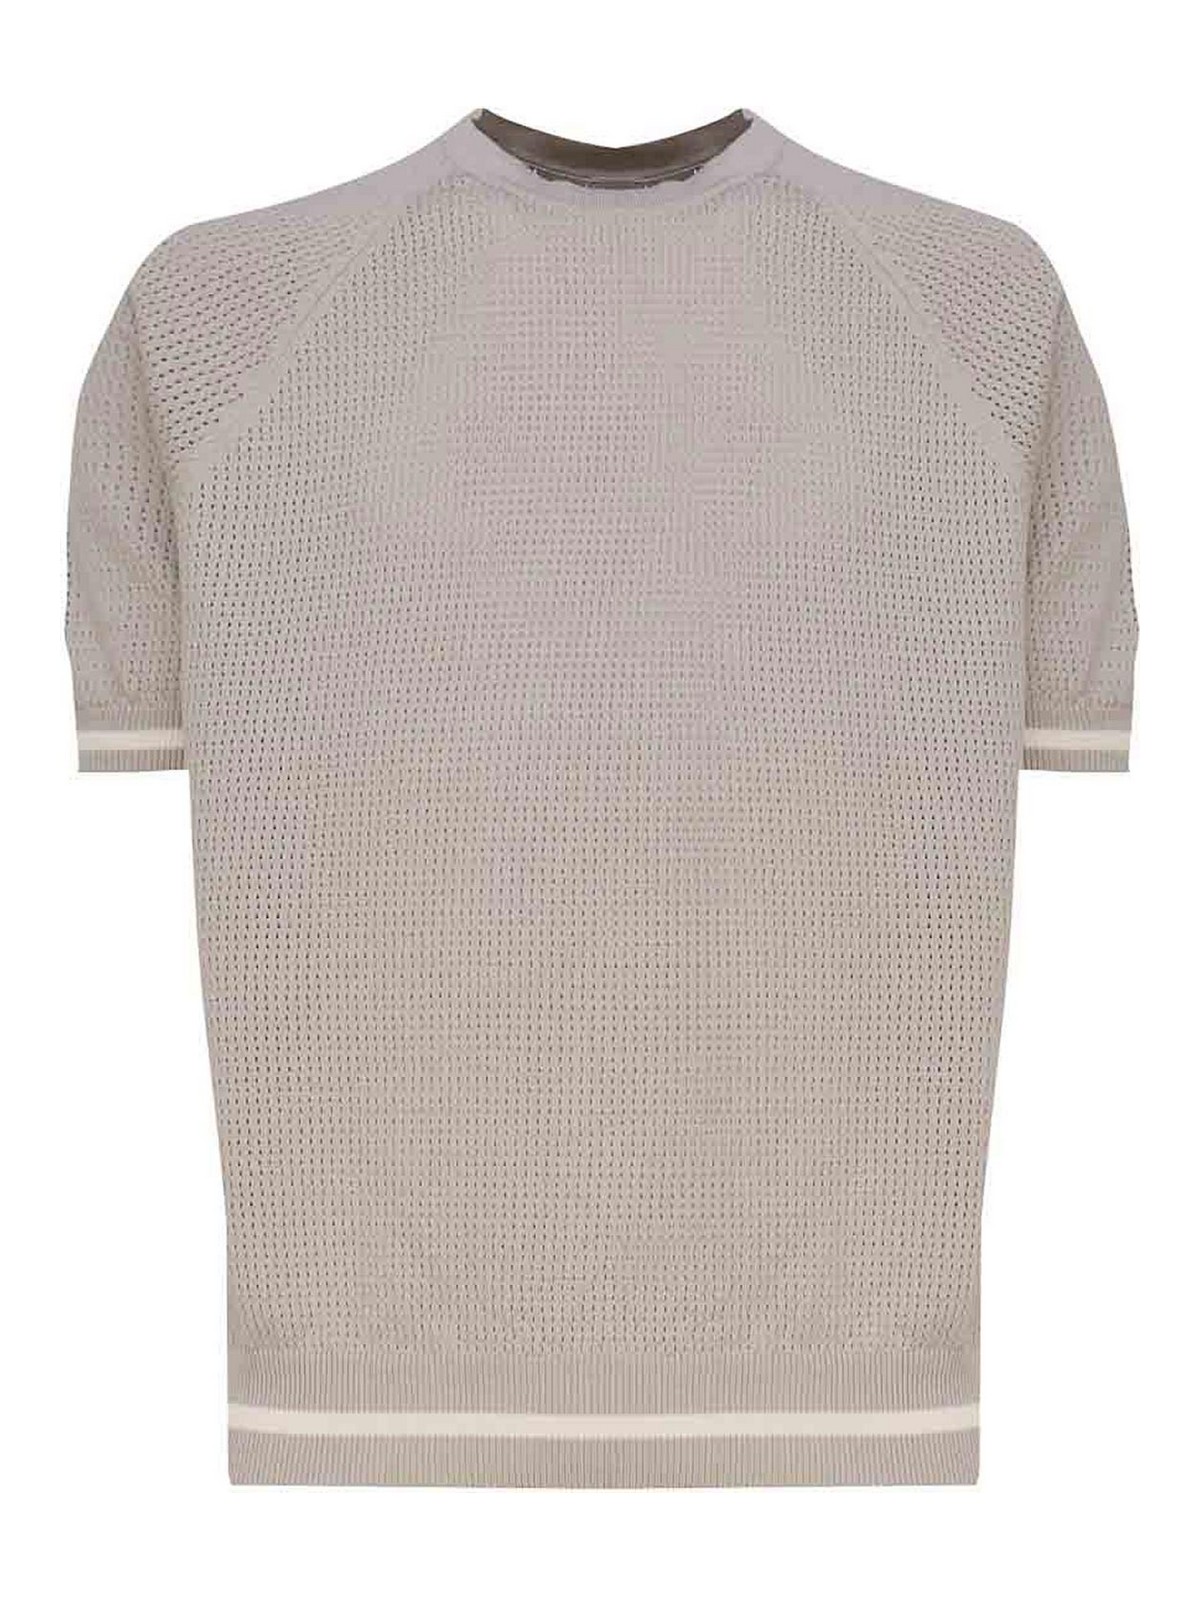 Shop Eleventy Beige Knitted Top